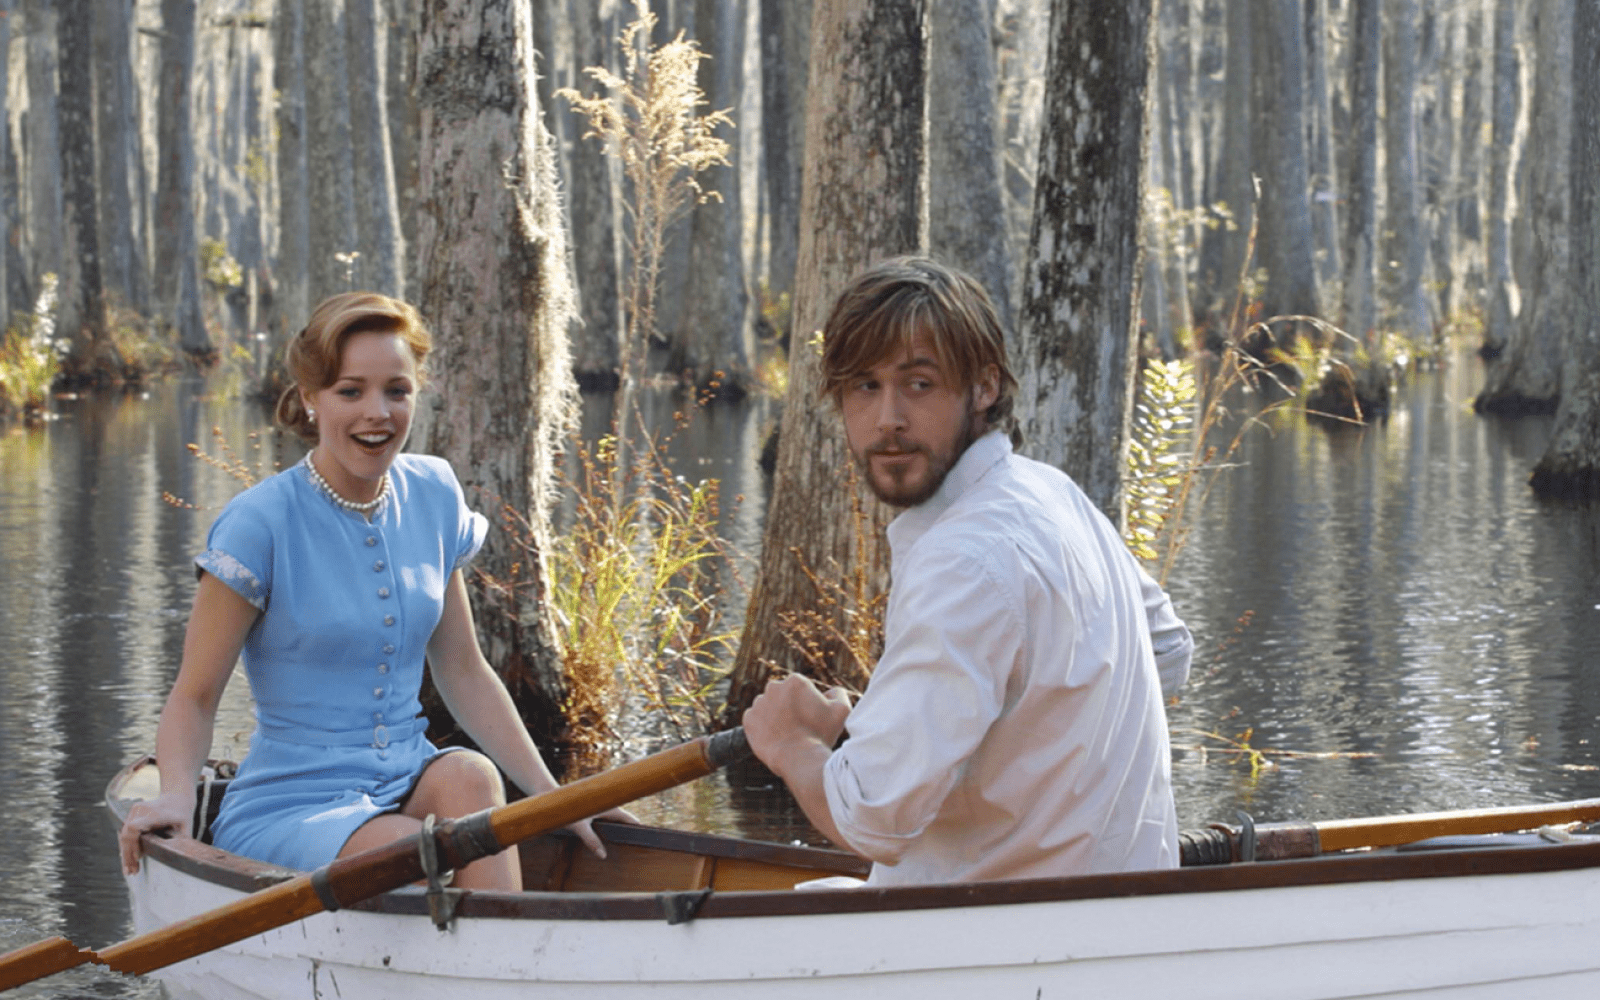 Ryan Gosling and Rachel McAdams in a still from The Notebook (2004)